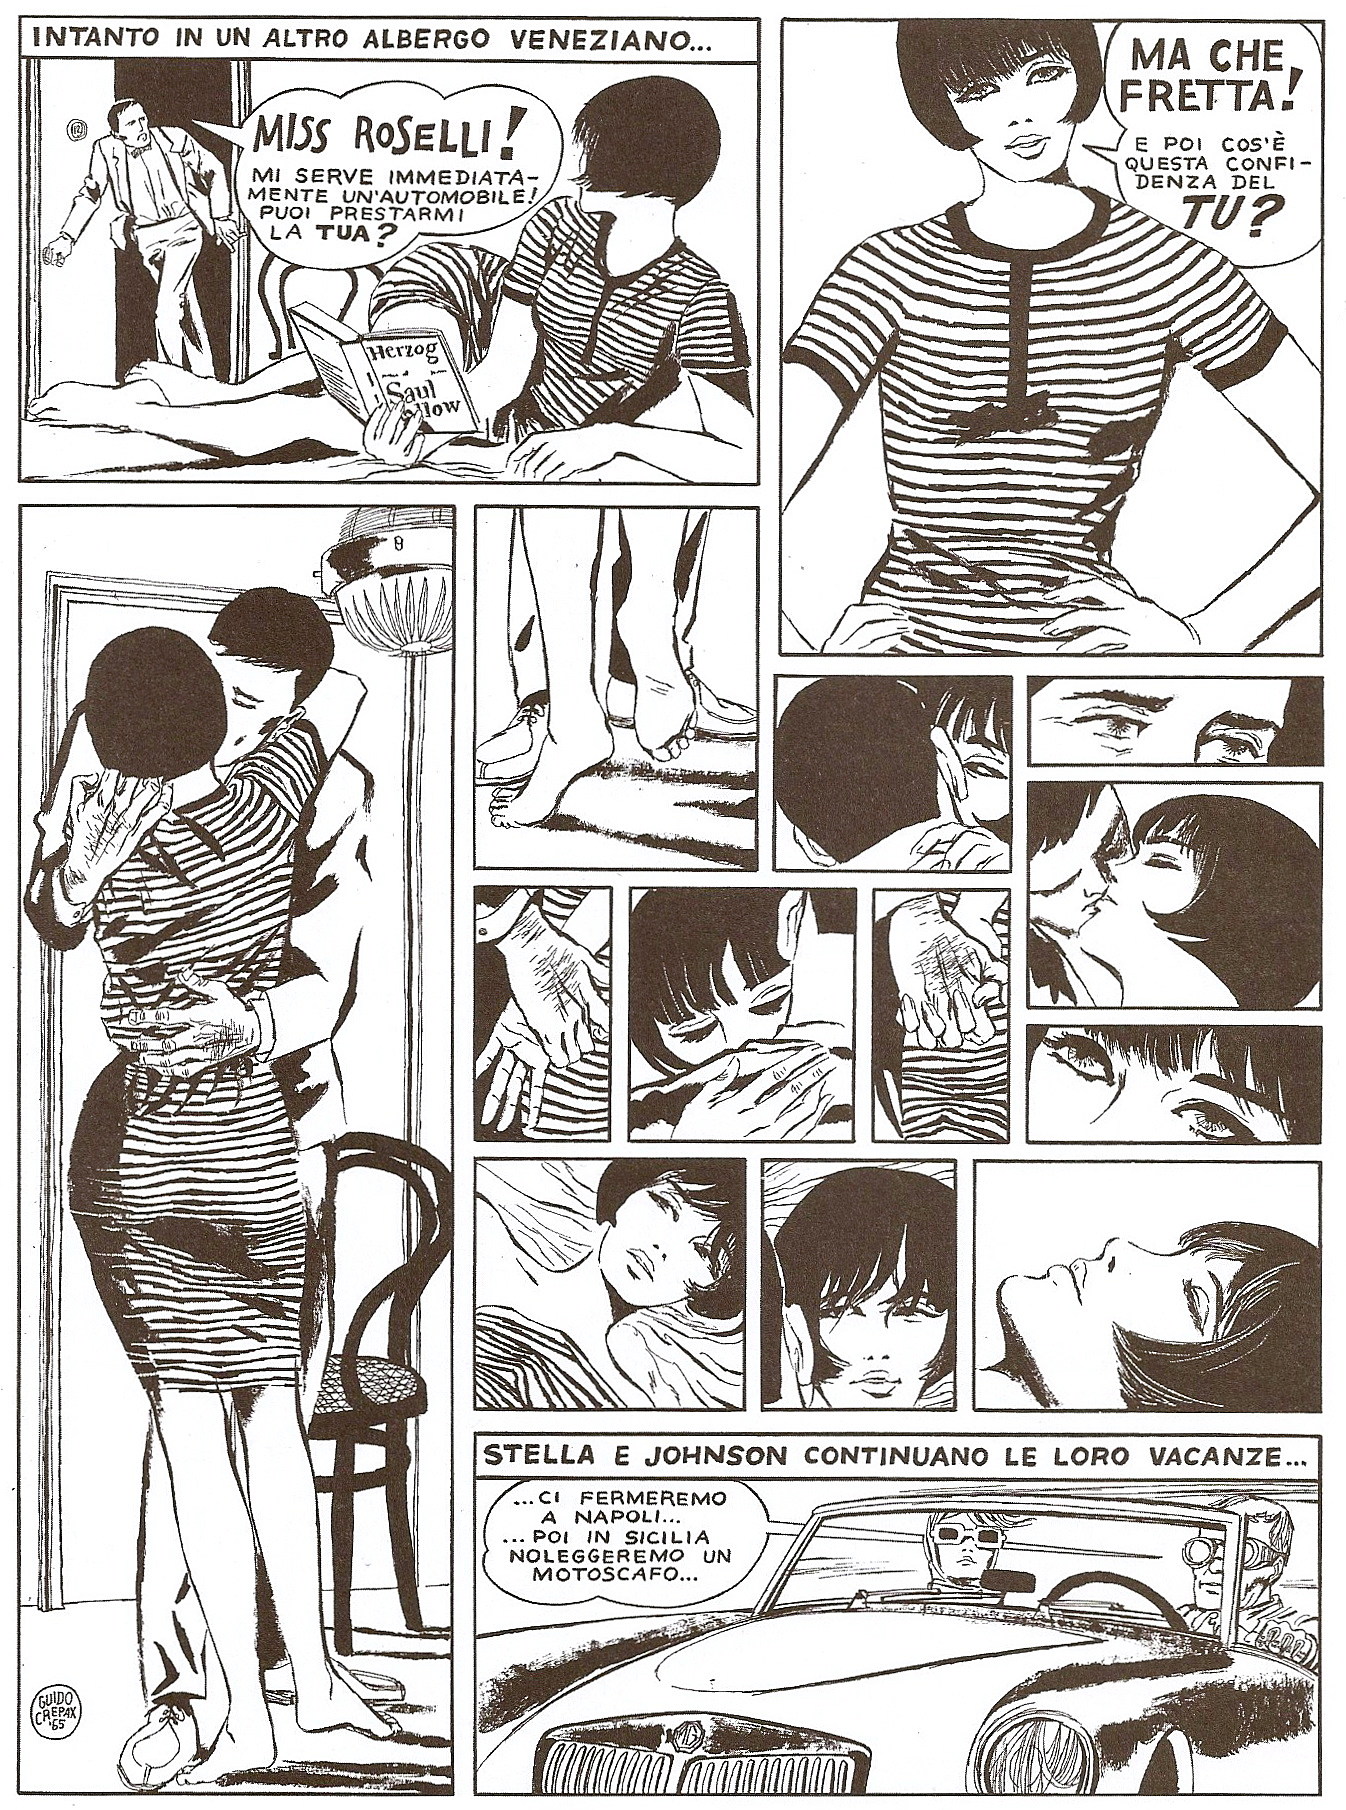 Hardcore Porn Drawings Colorful Art - Guido Crepax's 'Valentina': The High Water Mark of ...